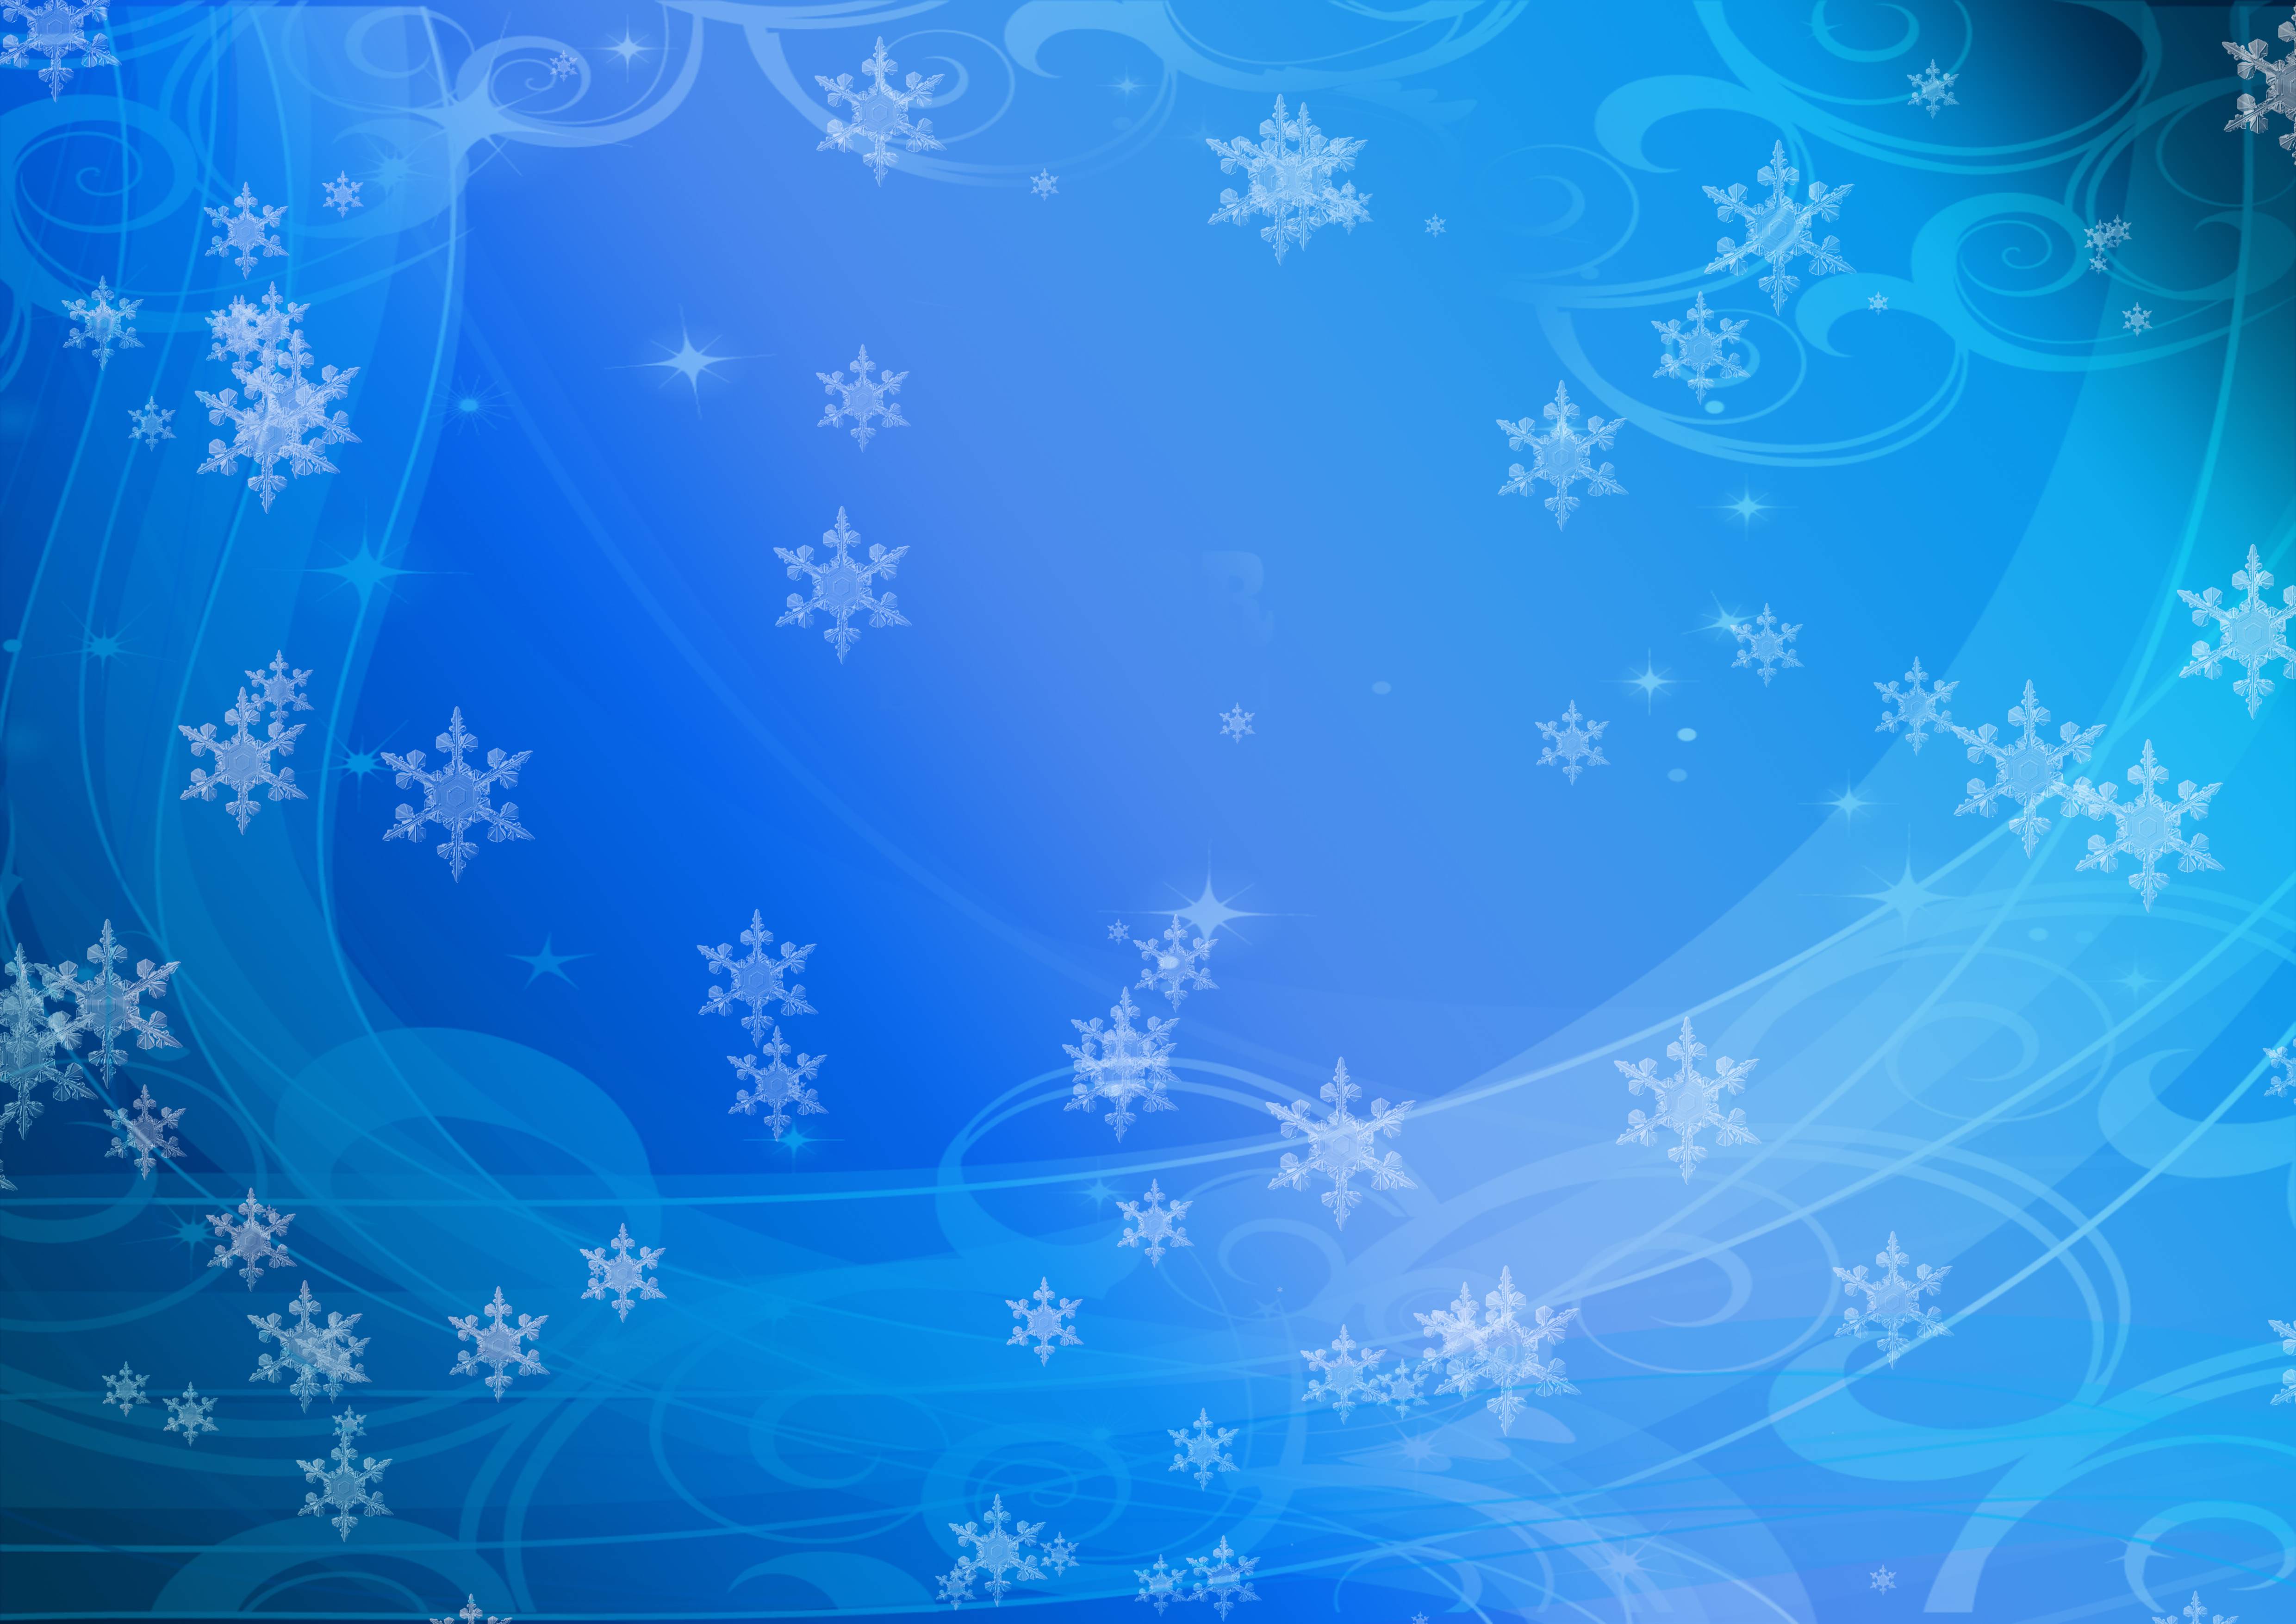 Wallpapers texture blue snowflakes on the desktop